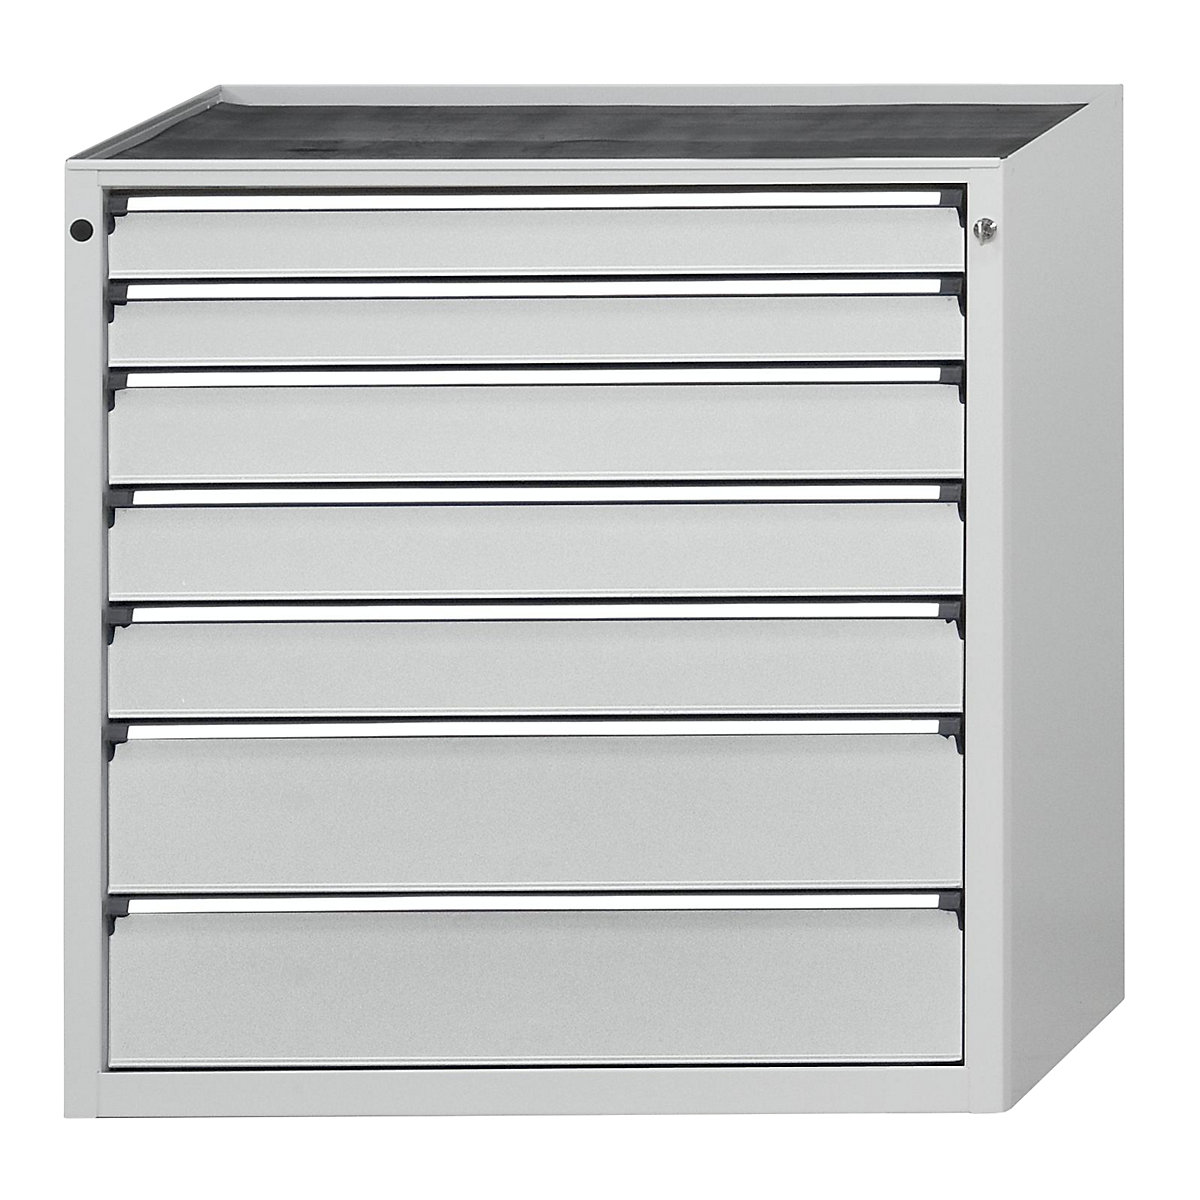 Drawer cupboard without worktop – ANKE, width 910 mm, 7 drawers, front in light grey-7